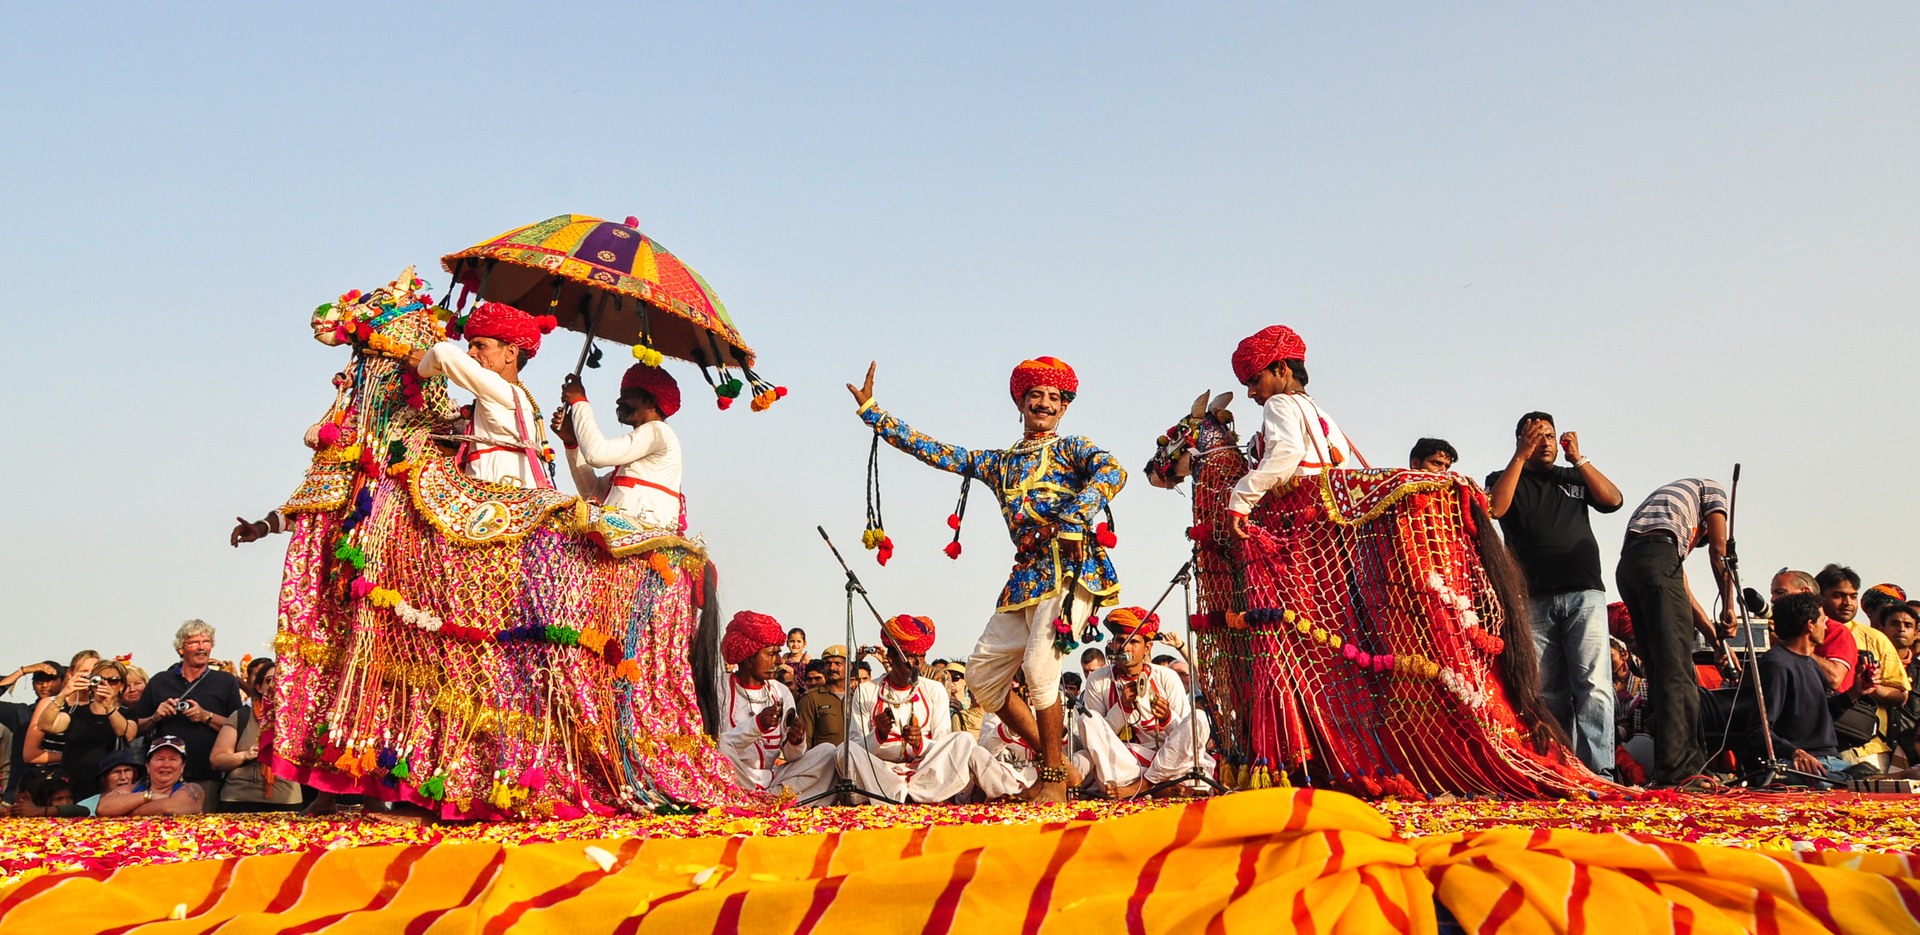 Rajasthan Culture - Everything About Food, Dressing, Art